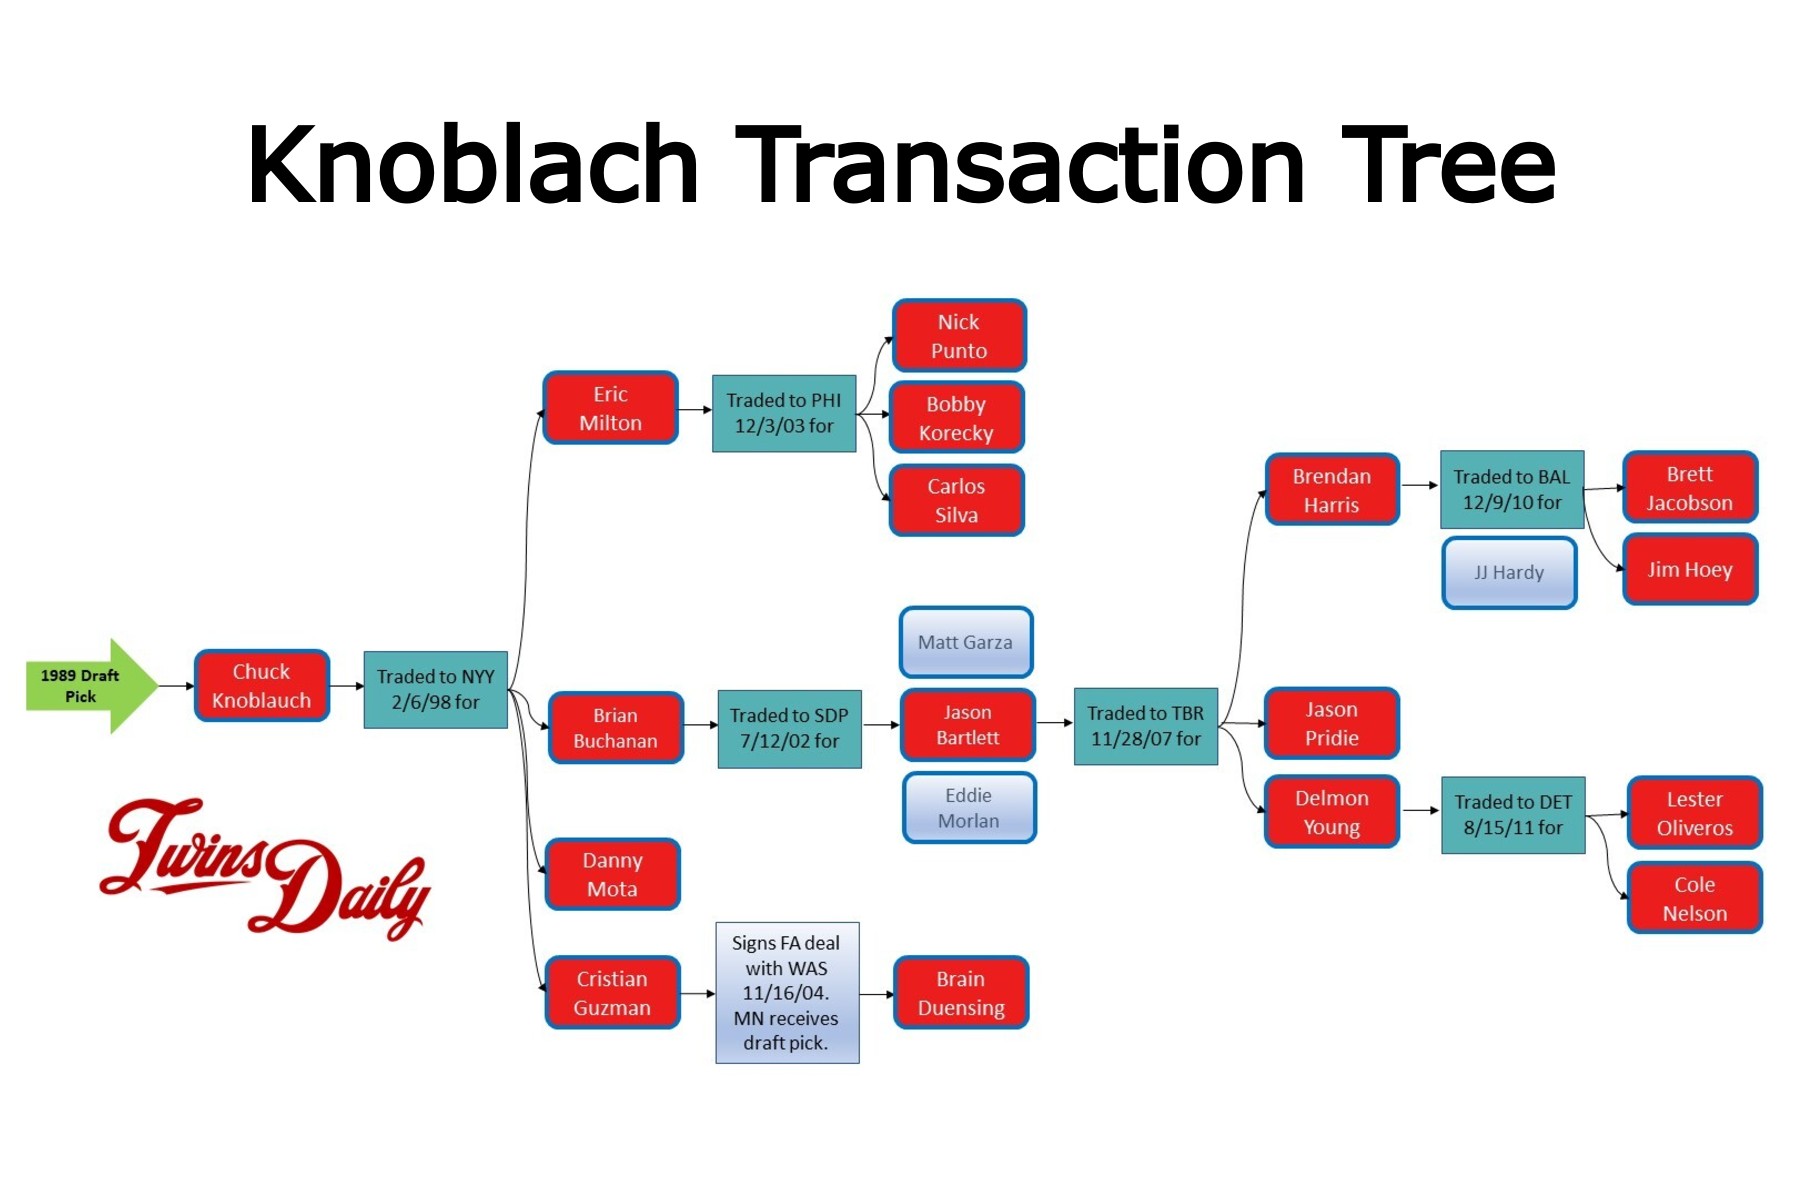 Chuck Knoblauch Transaction Tree (Source; Twins Daily)